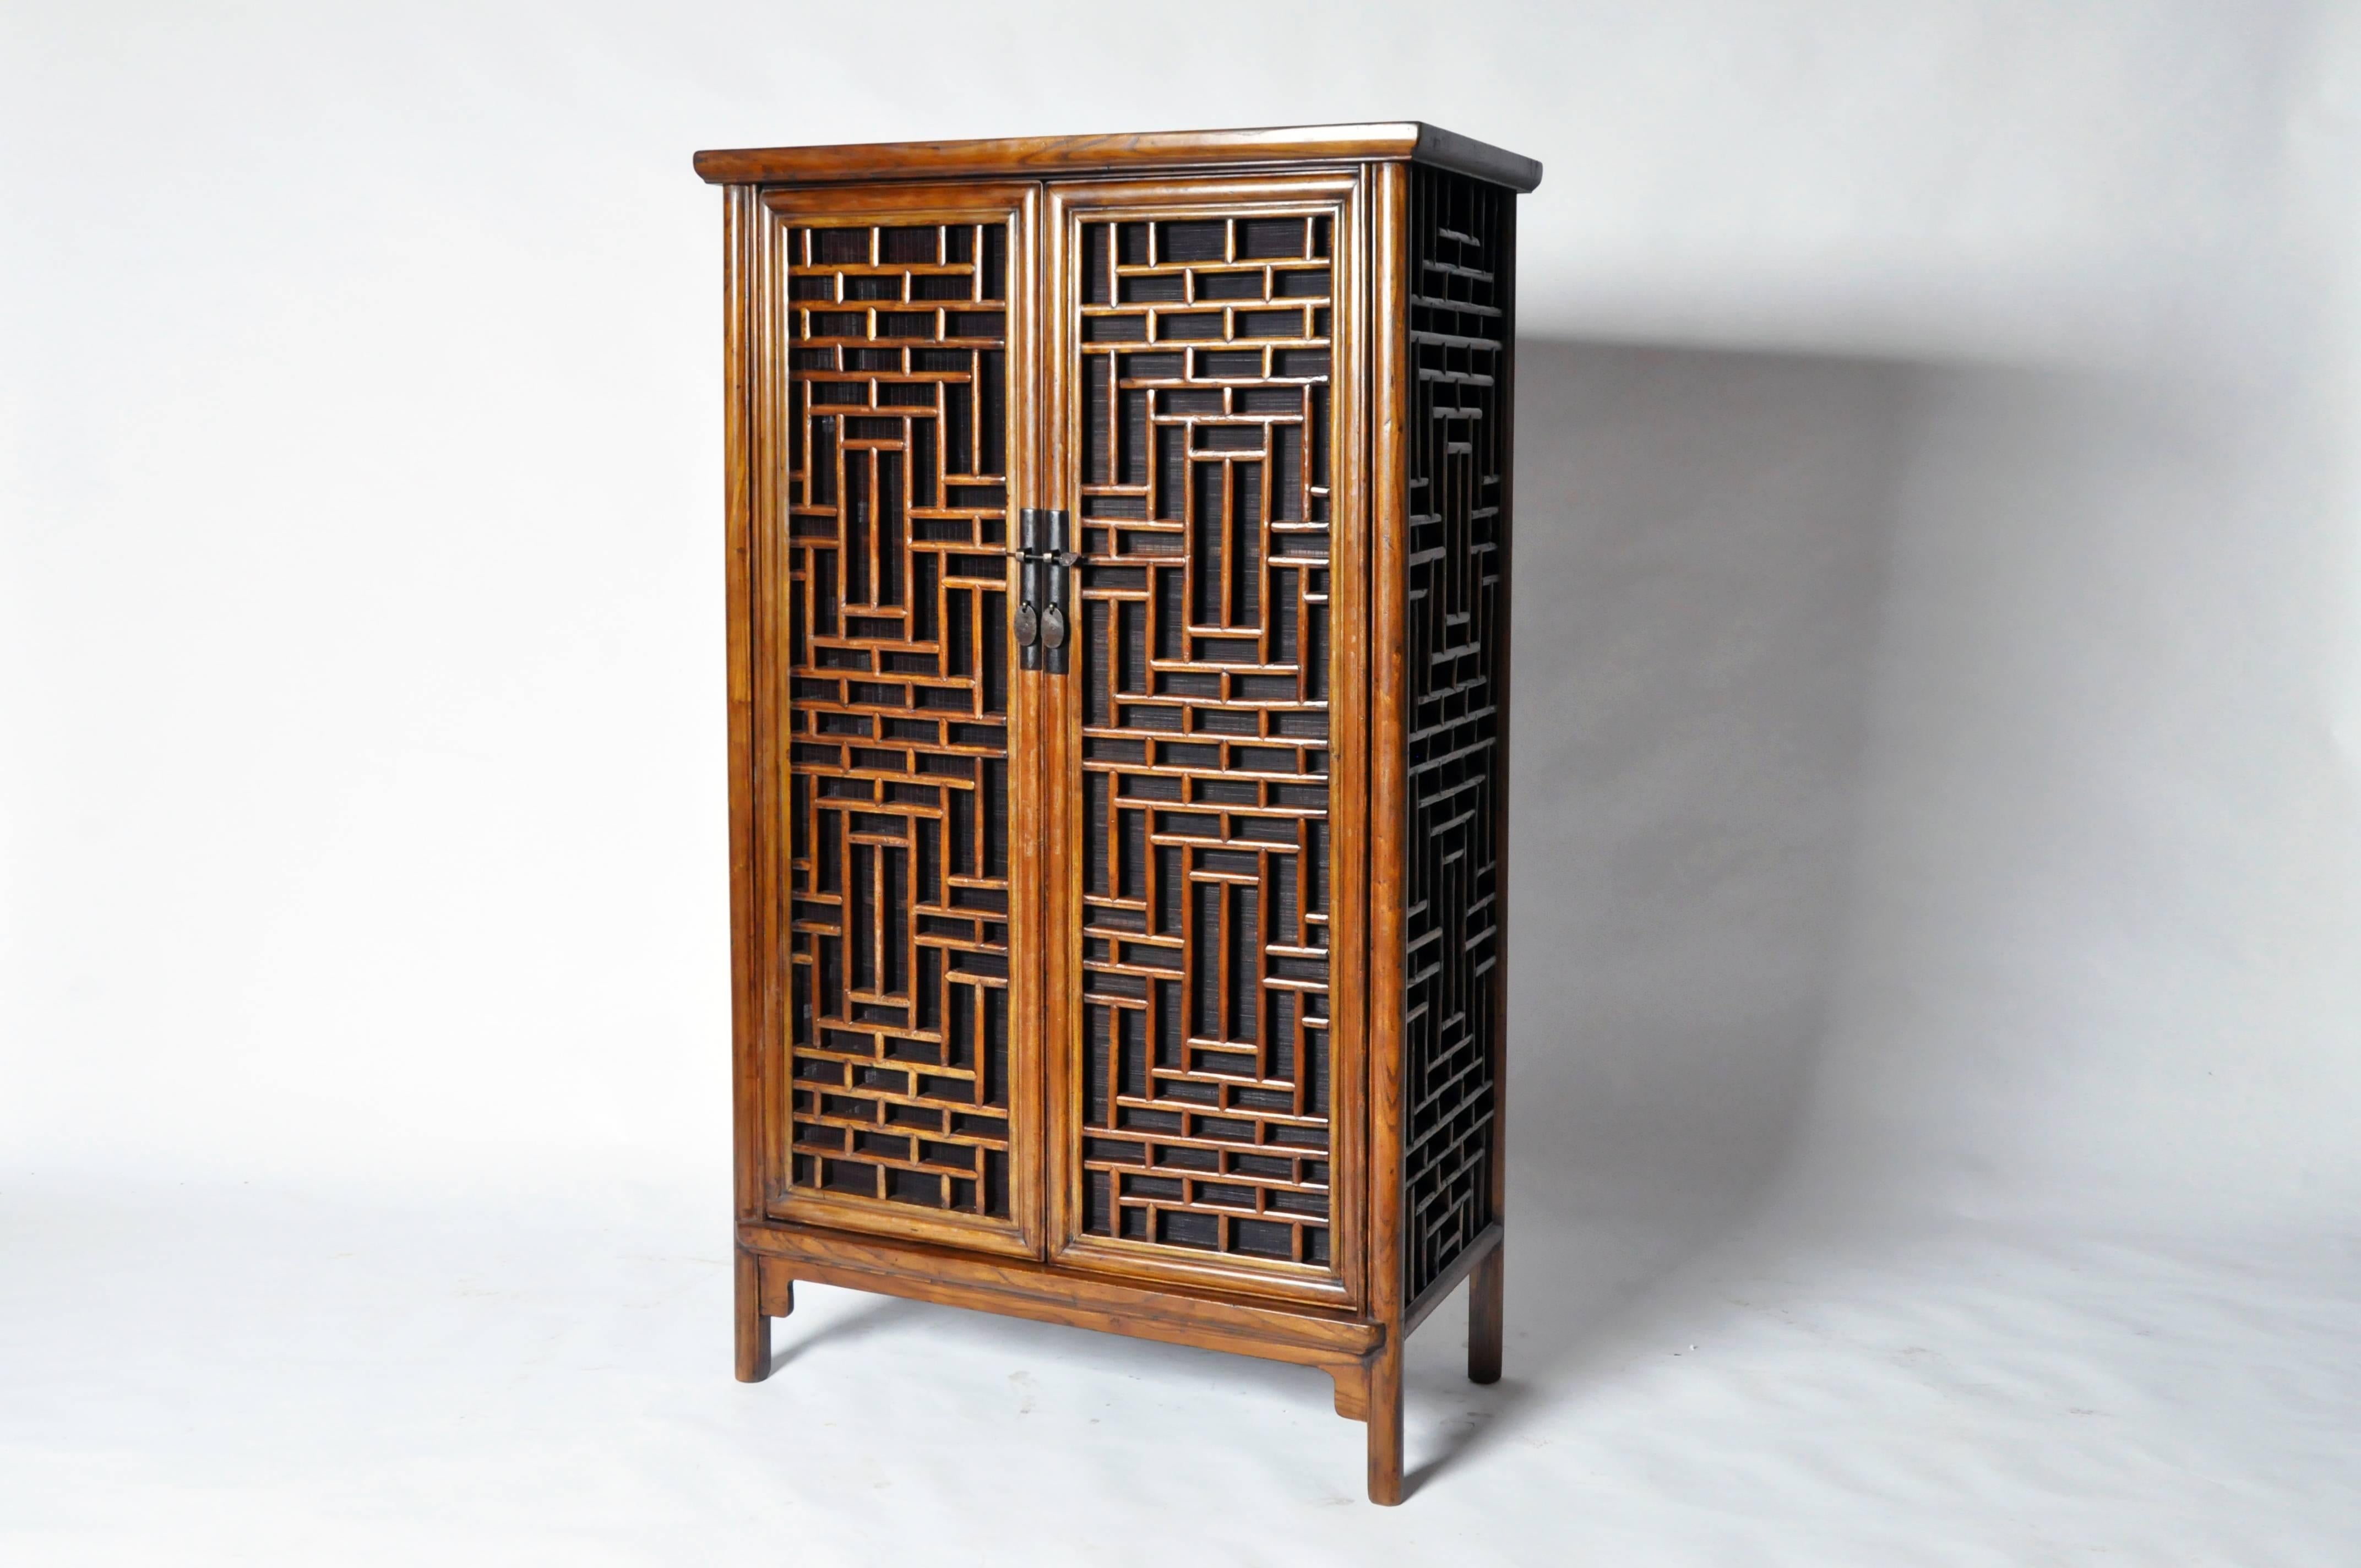 This elegant Chinese lattice cabinet is made from elmwood with restorations. It features shelving inside for ample storage.